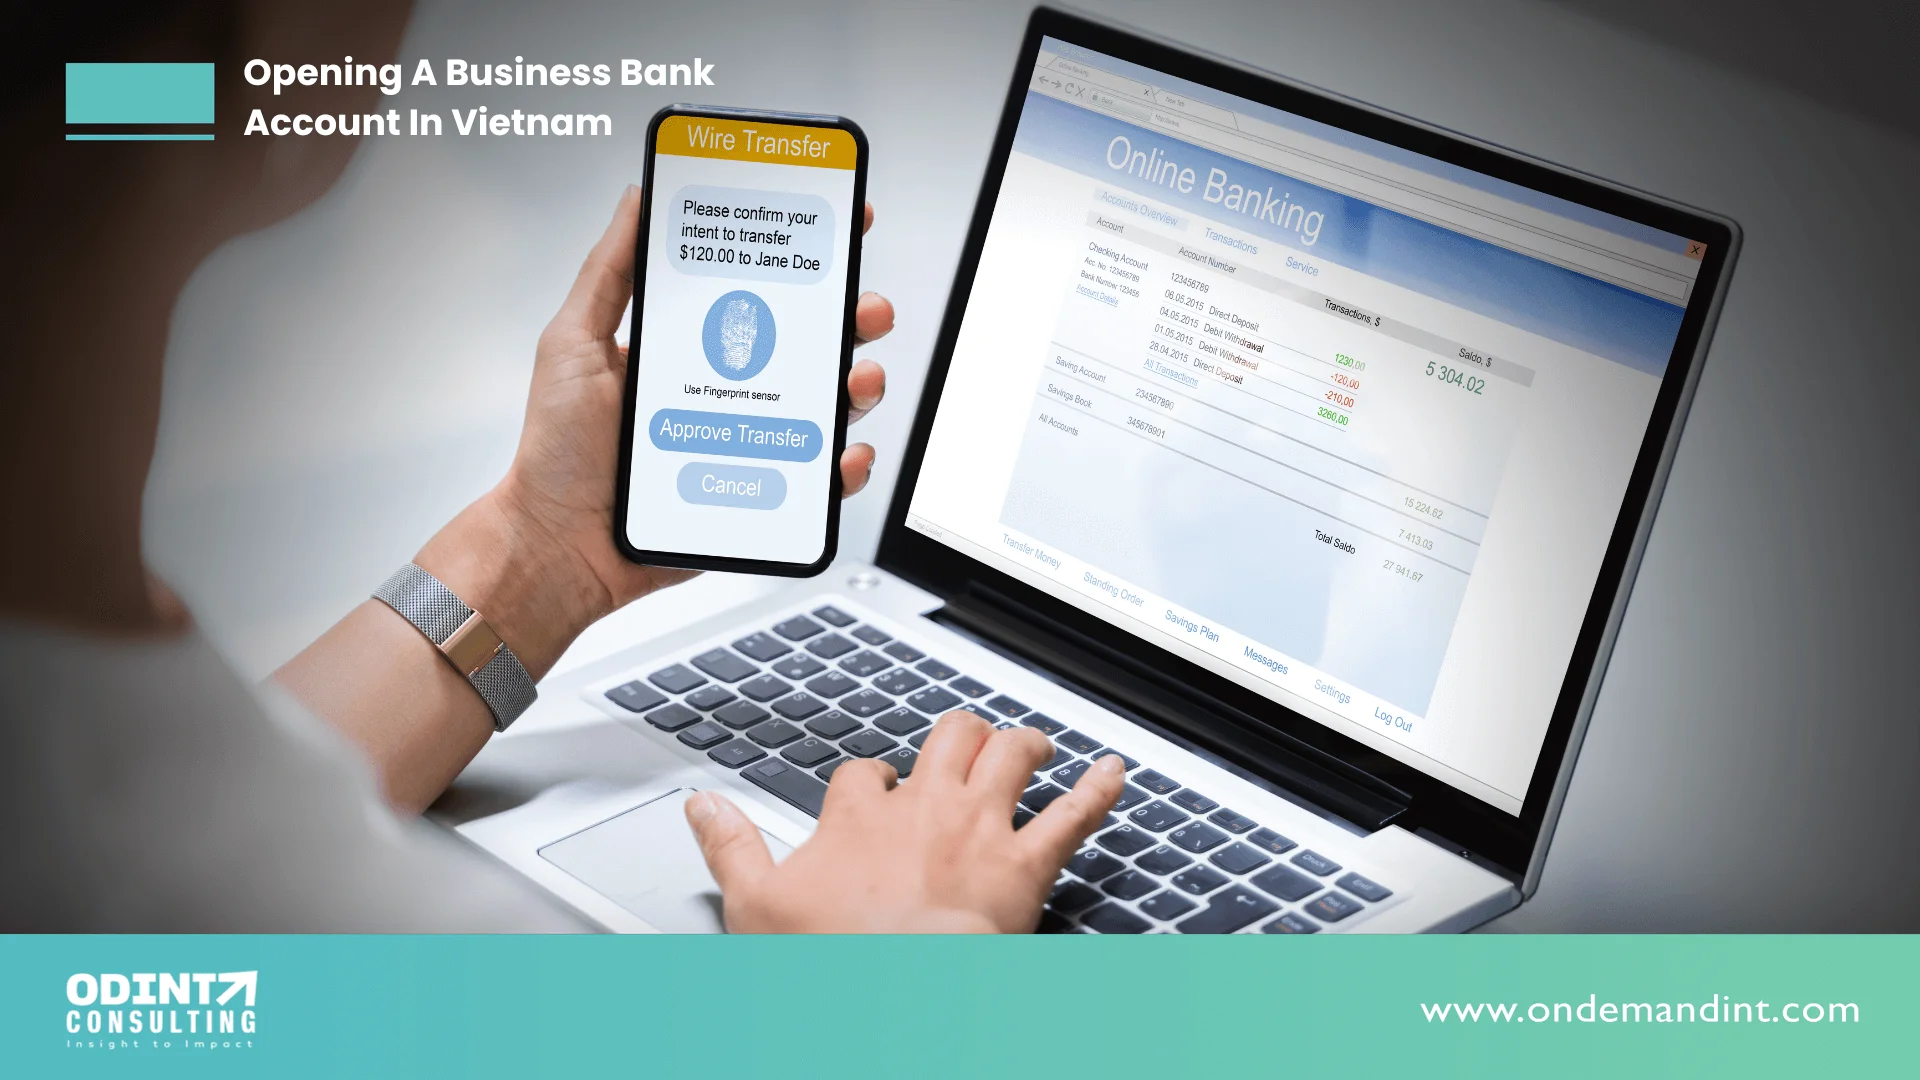 Guide To Opening A Business Bank Account In Vietnam: Procedure & Types of Account